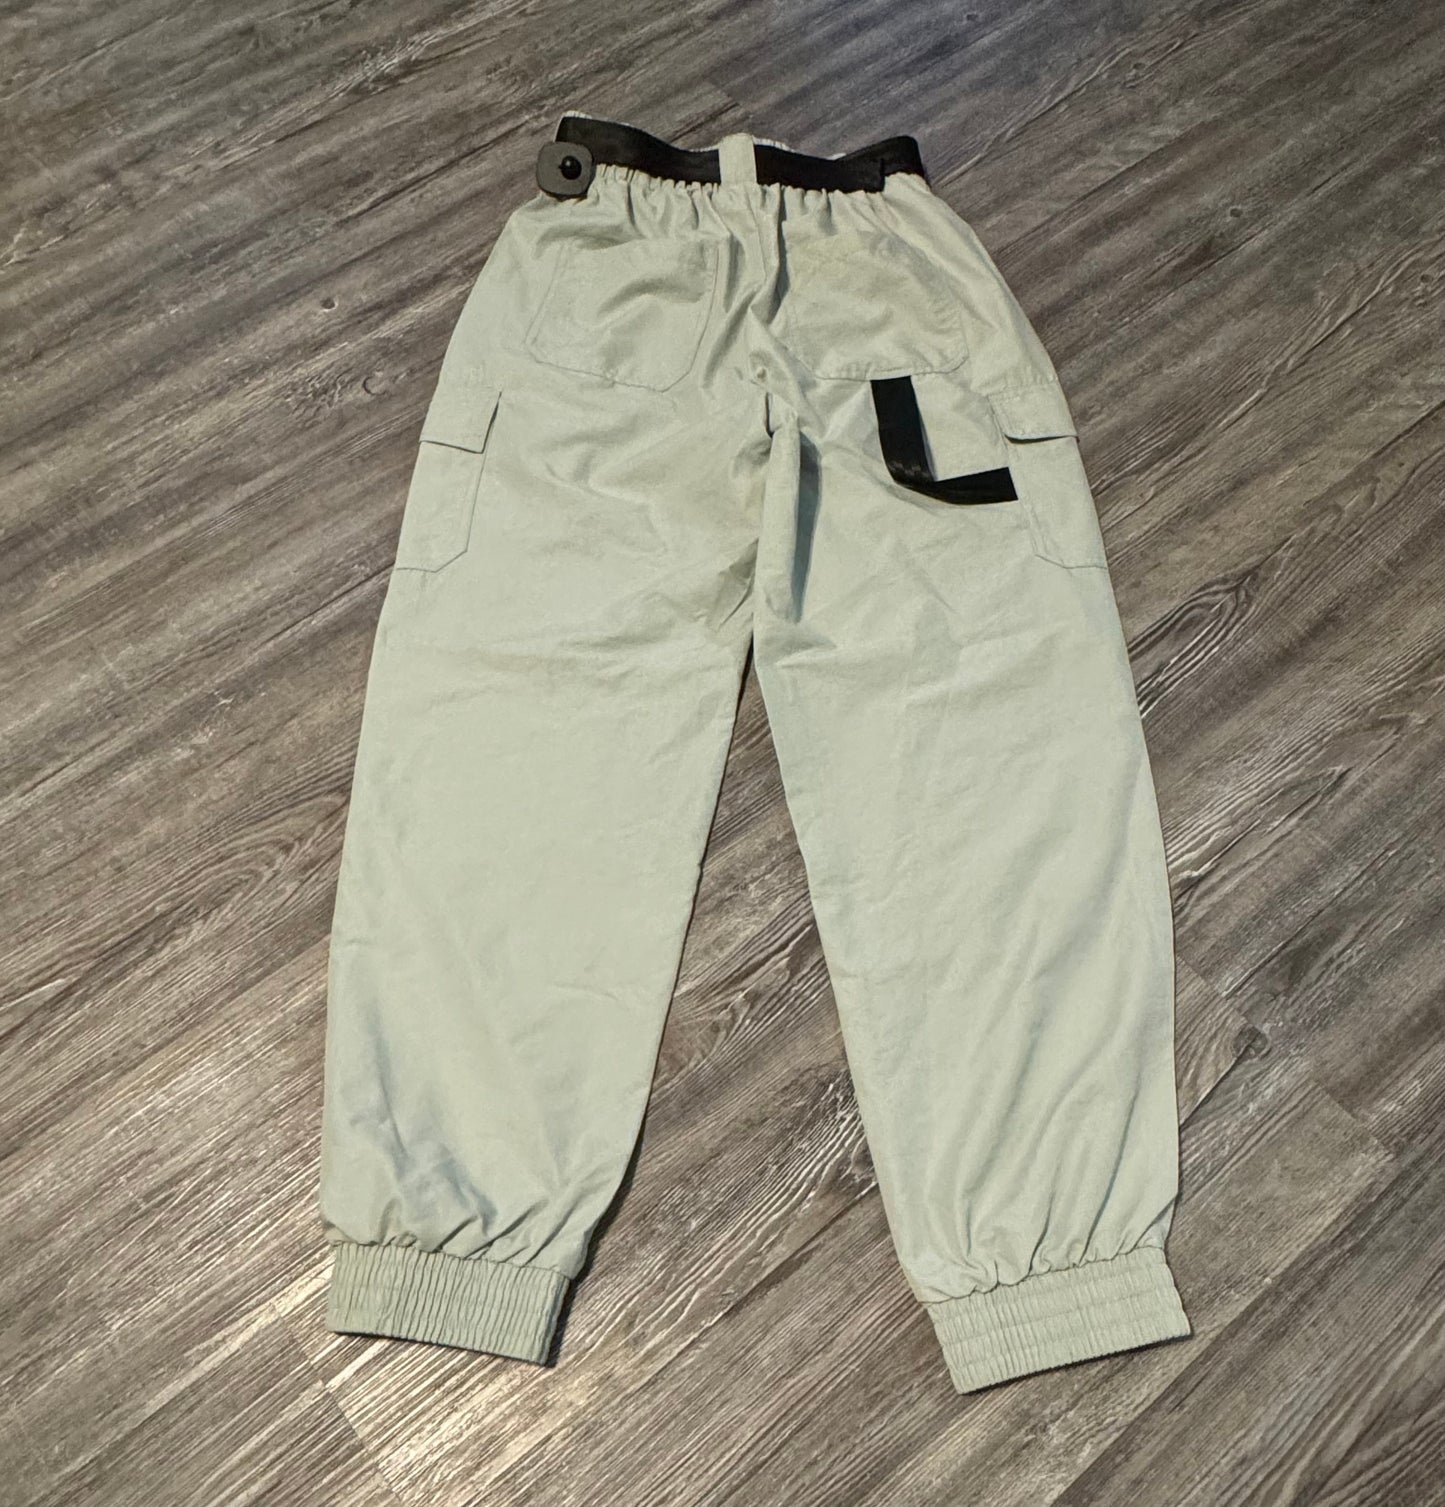 Pants Ankle By Clothes Mentor  Size: S